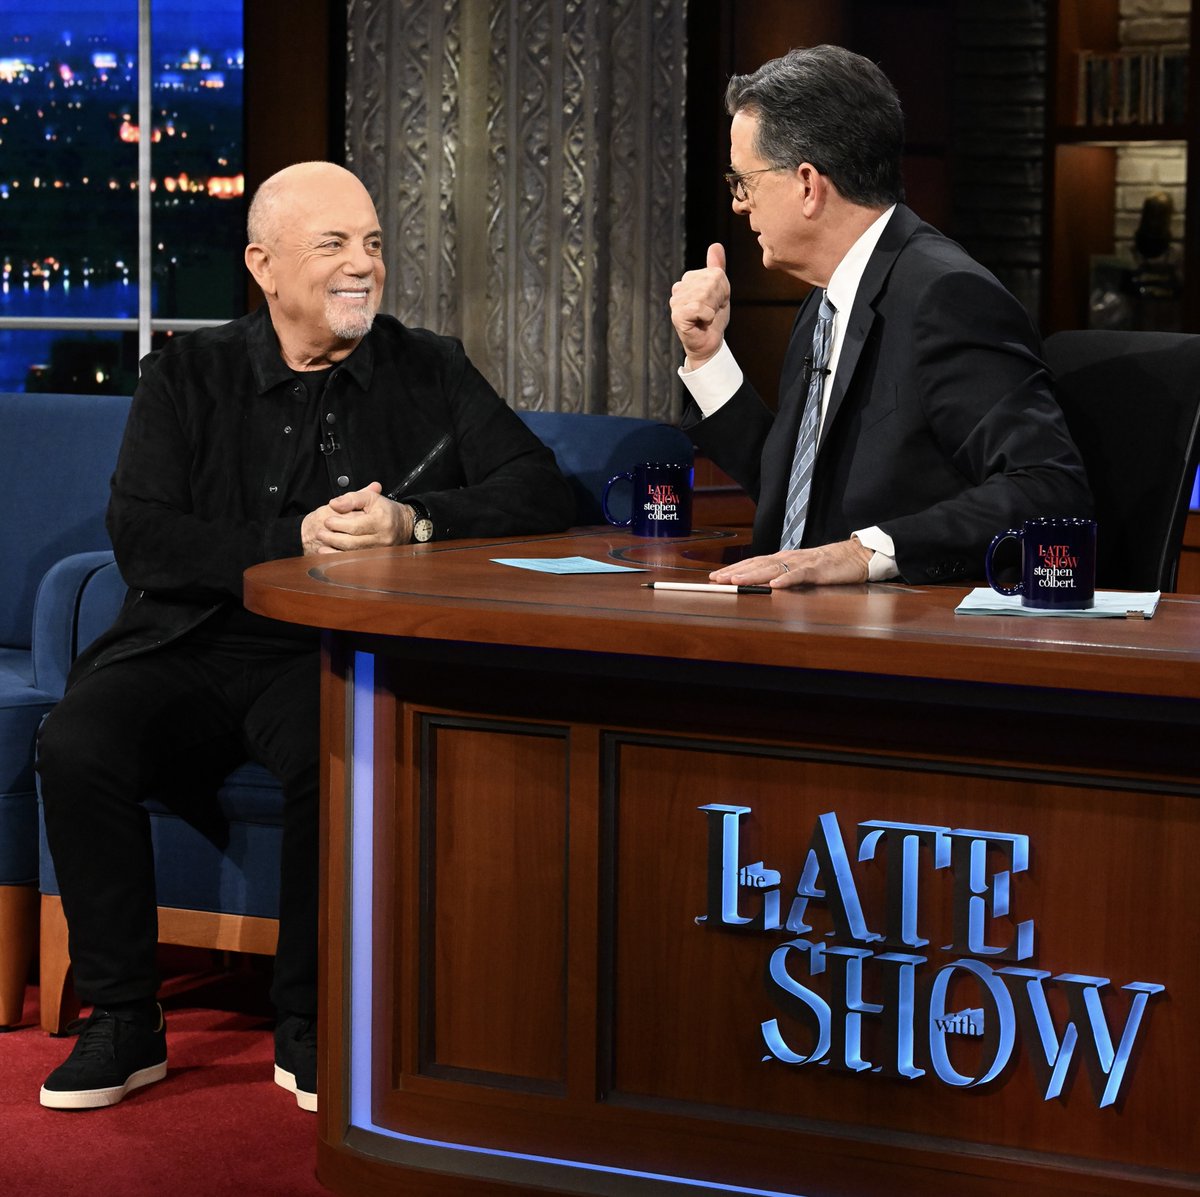 Tune in! Billy will be joining @StephenAtHome on the @colbertlateshow TONIGHT at 11:35pm ET/10:35 CT #Colbert